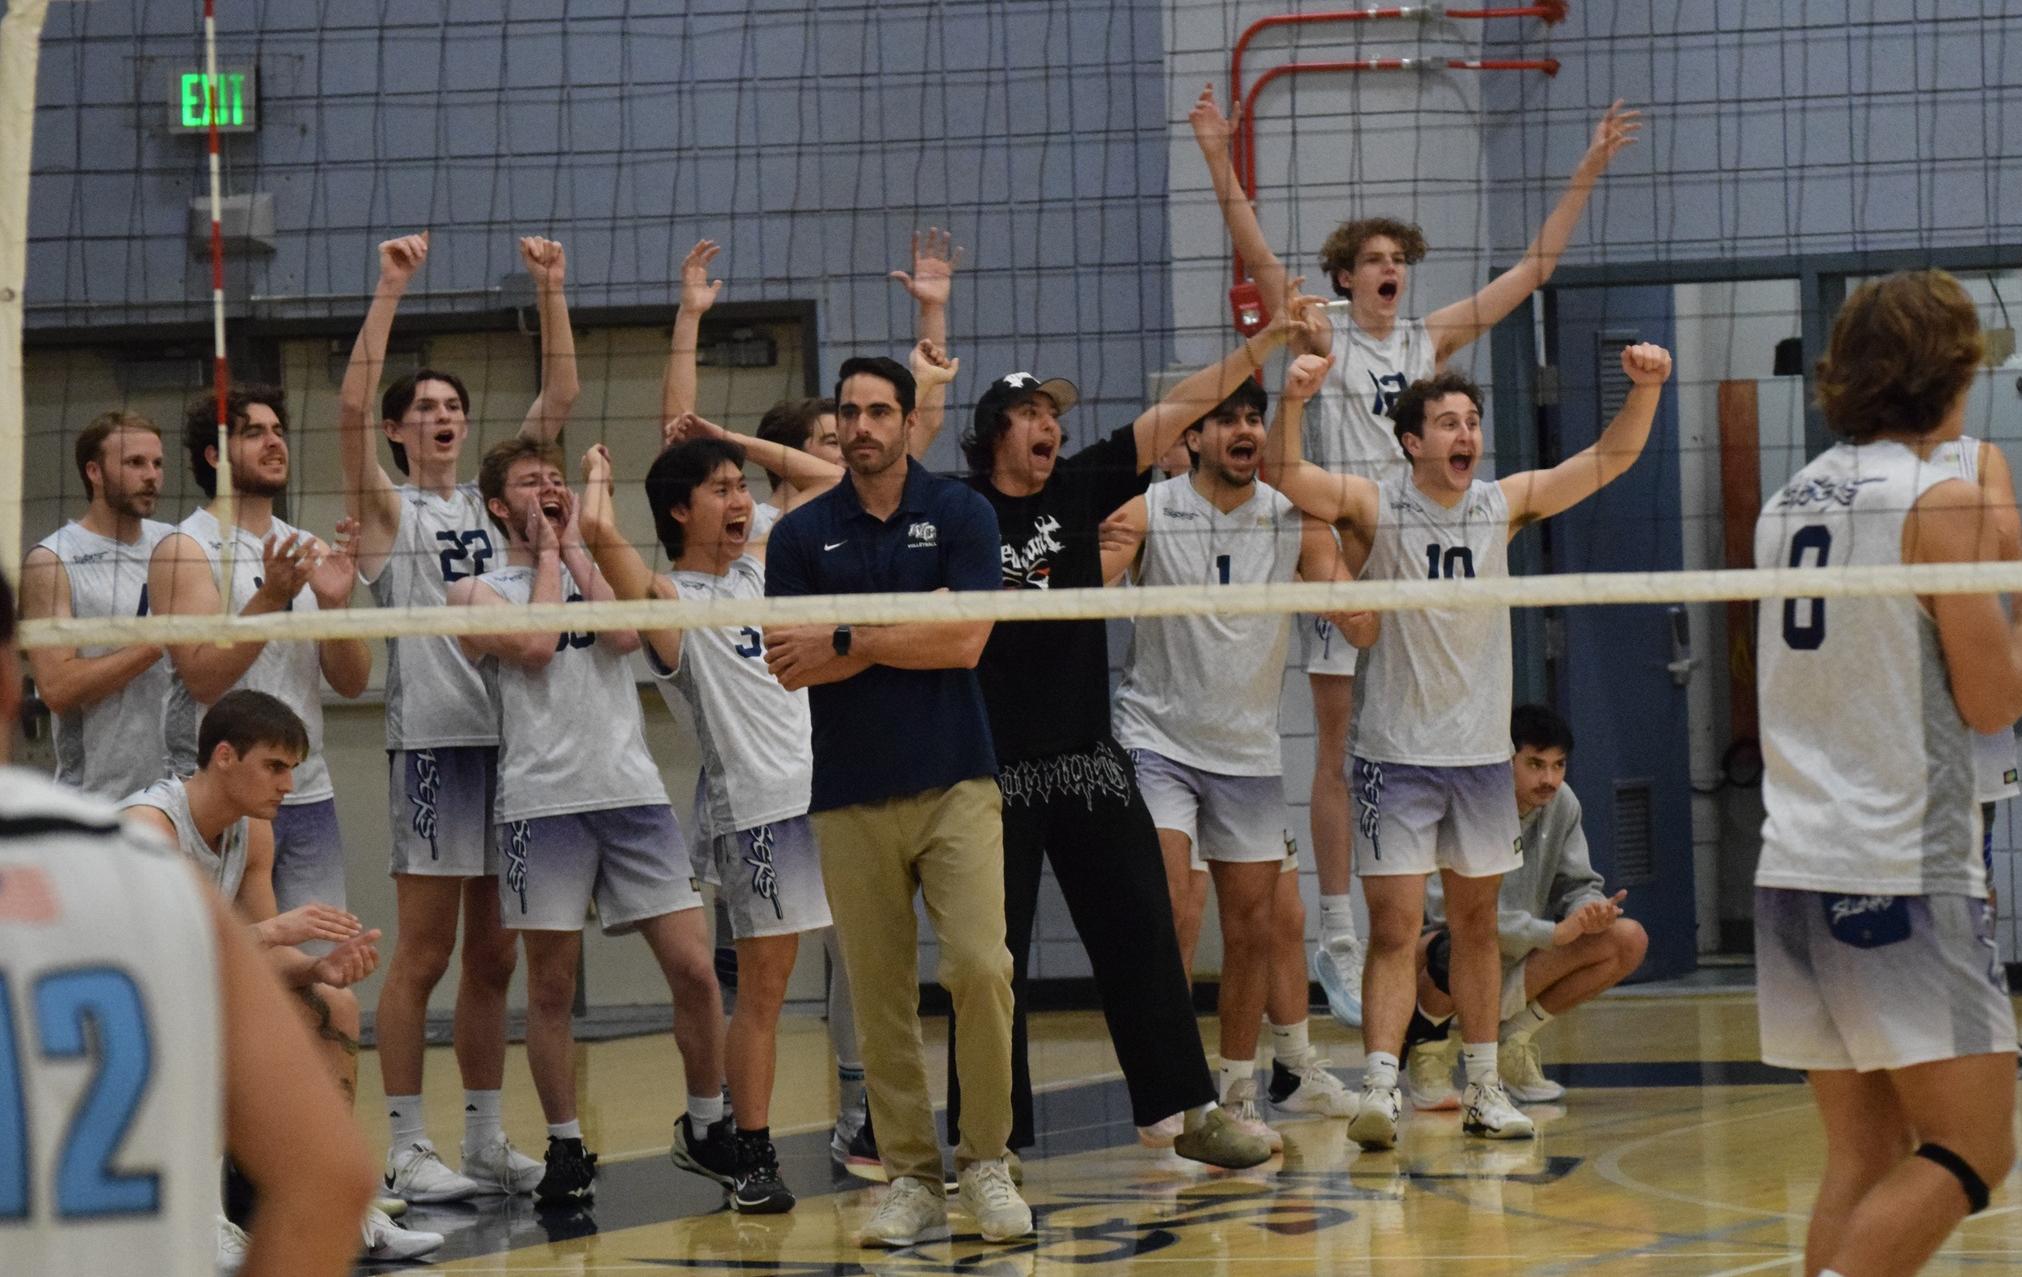 Men's volleyball team moves up to fourth in latest state poll